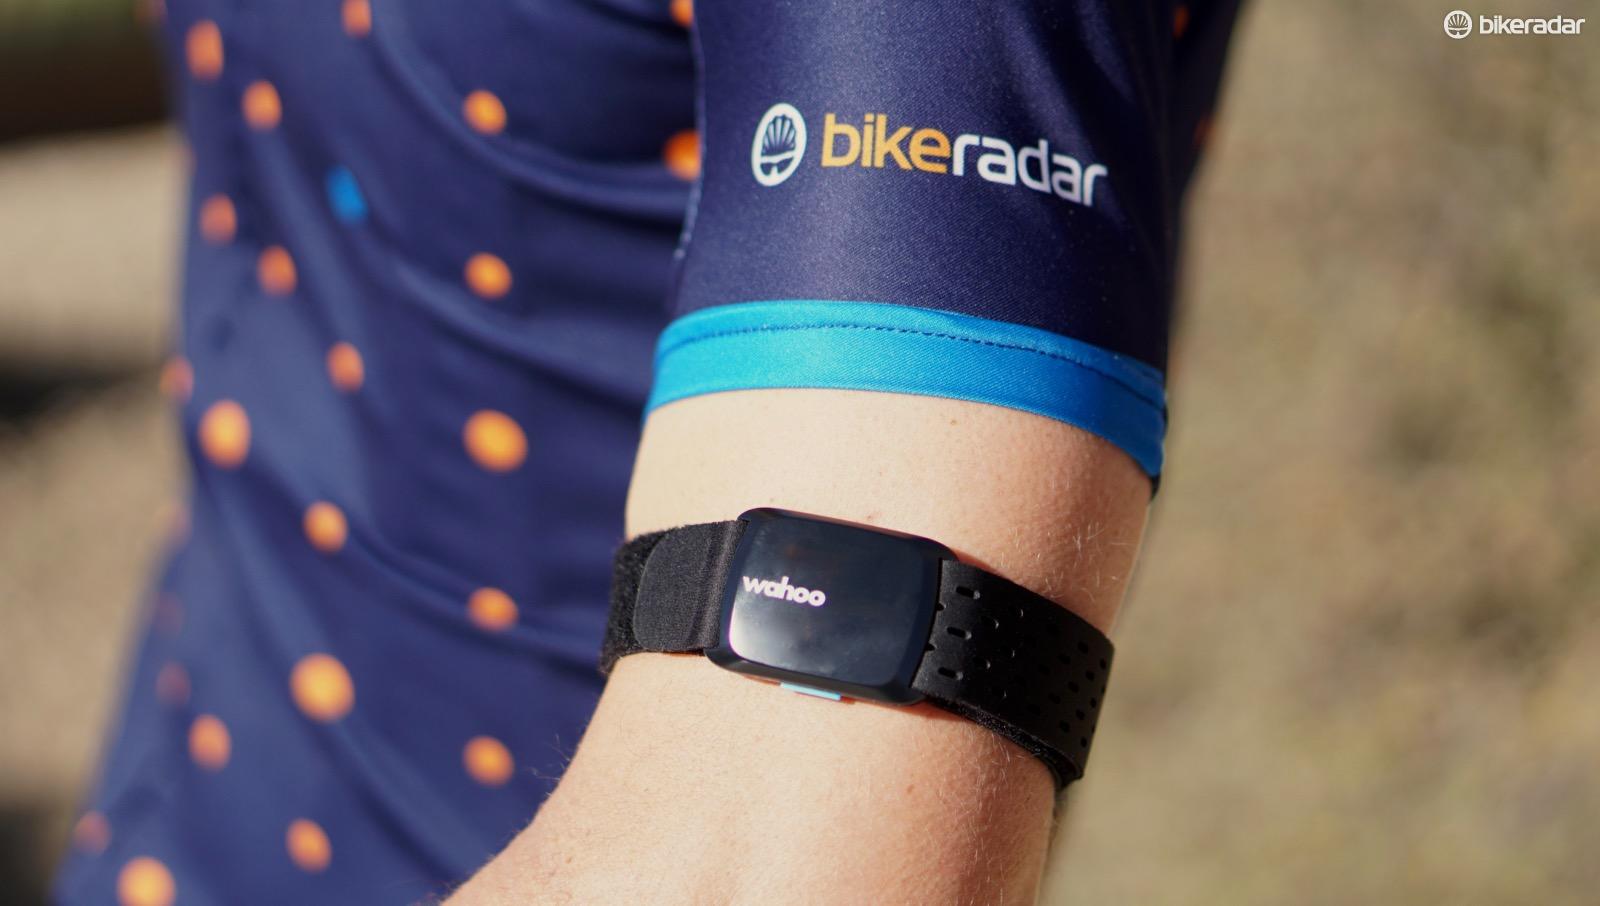 Wahoo updates Tickr and Tickr X heart rate monitors to improve battery  life, comfort and connectivity - BikeRadar